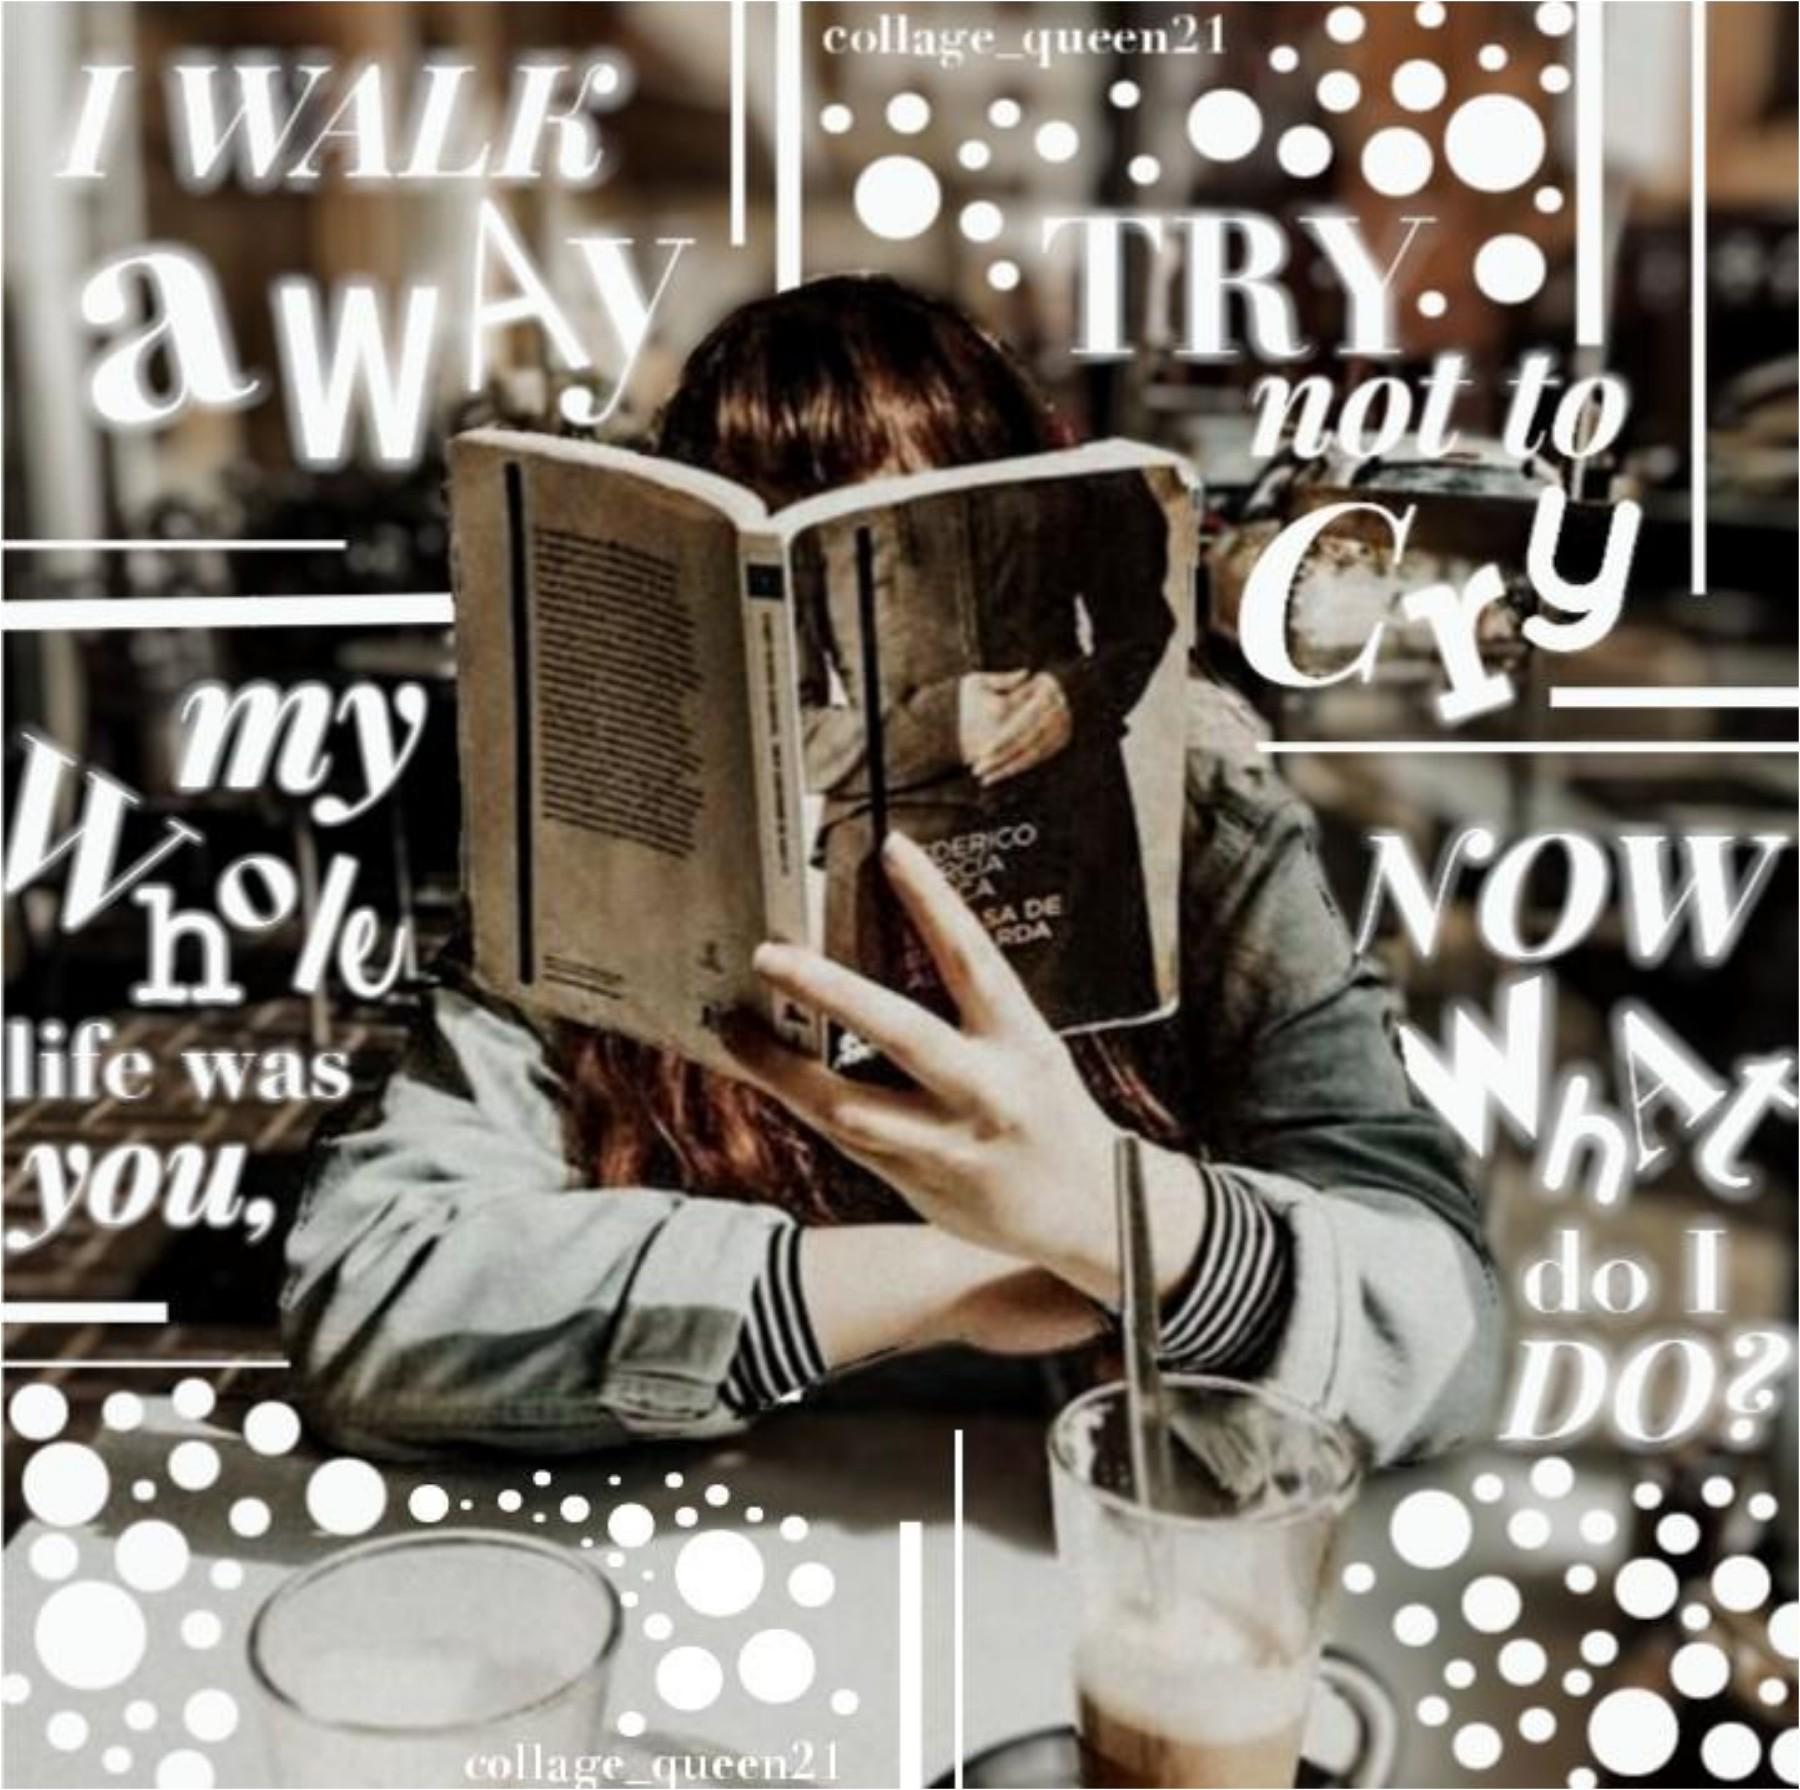 🧾 tap me! 🧾
hi everyone! the my entry into -itsbrianna- 's contest! I got inspo from Sophie @forever-lost, go give her a follow! qotd: when's y'all last day of school? mines tomorrow ;) That's my 100% original text! I hope y'all like this one 🤍 5/11 